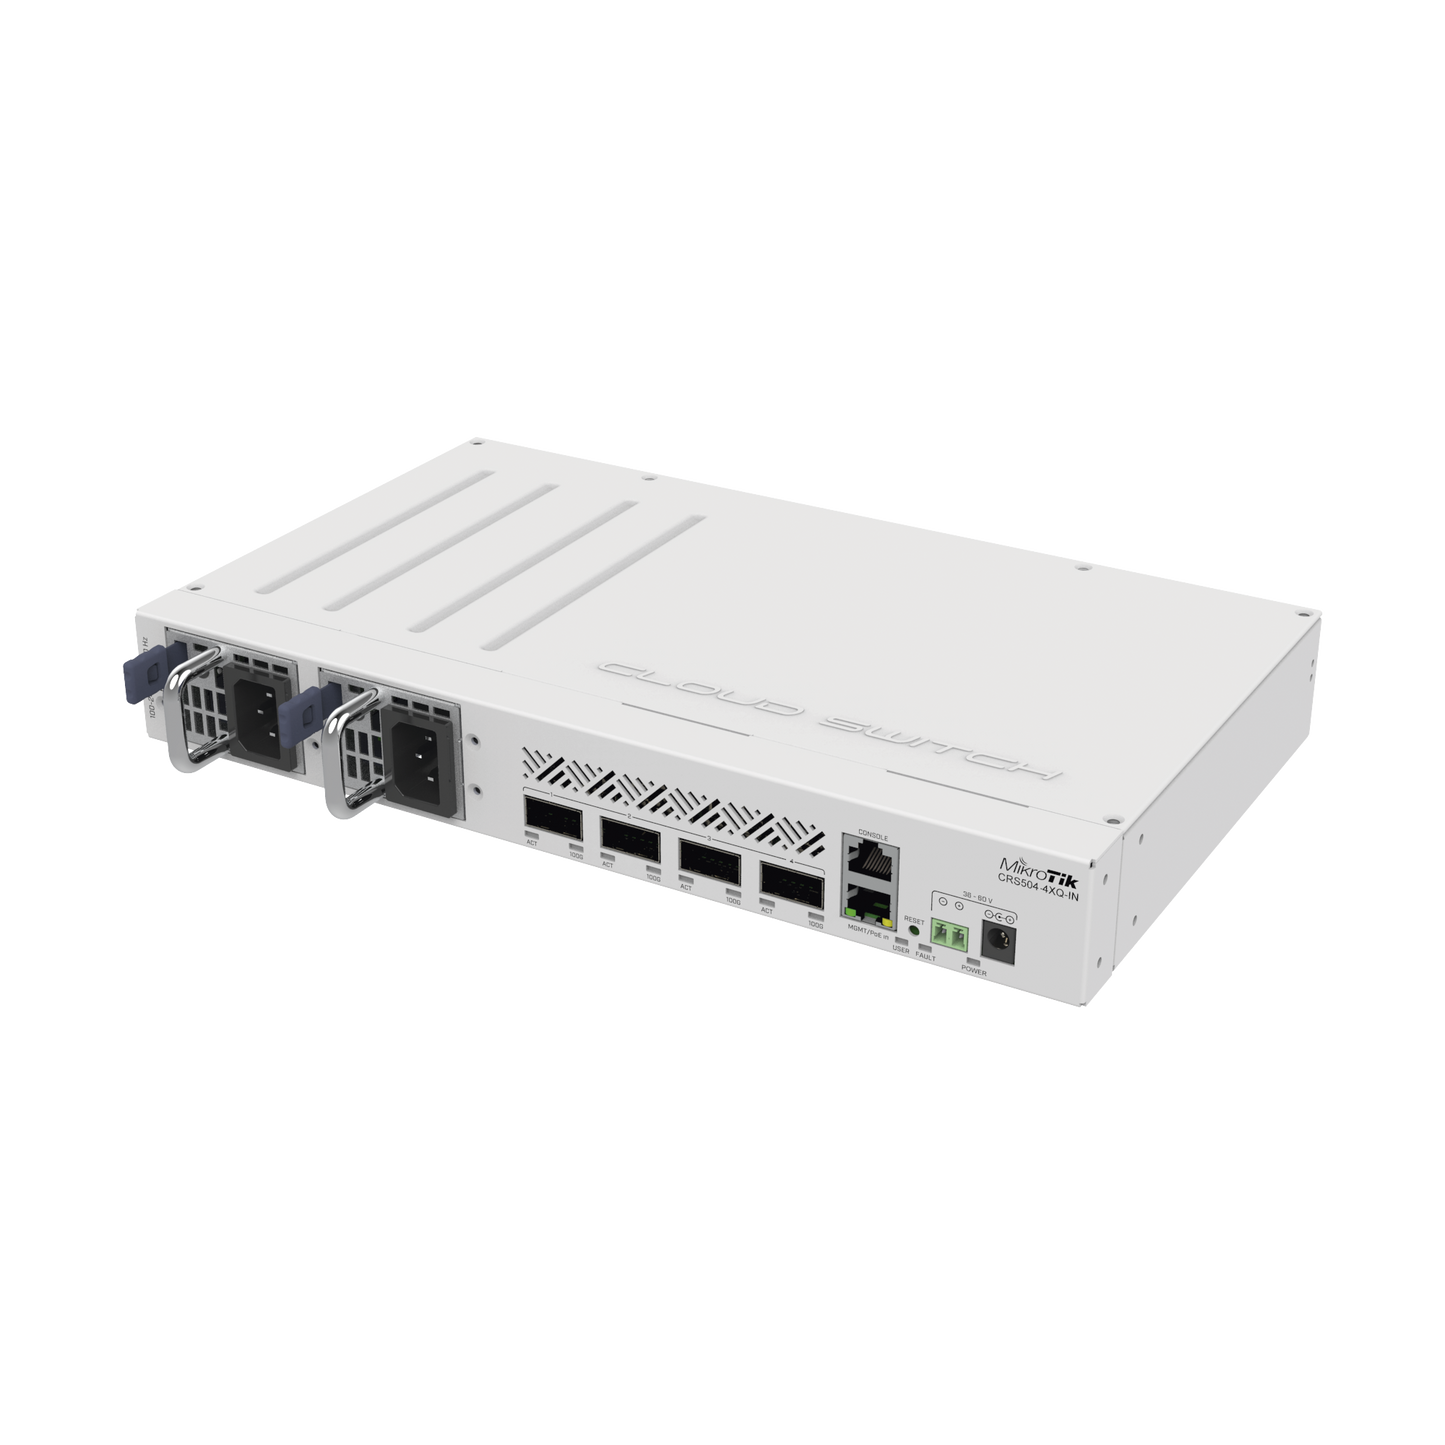 Cloud Router Switch 504-4XQ-IN